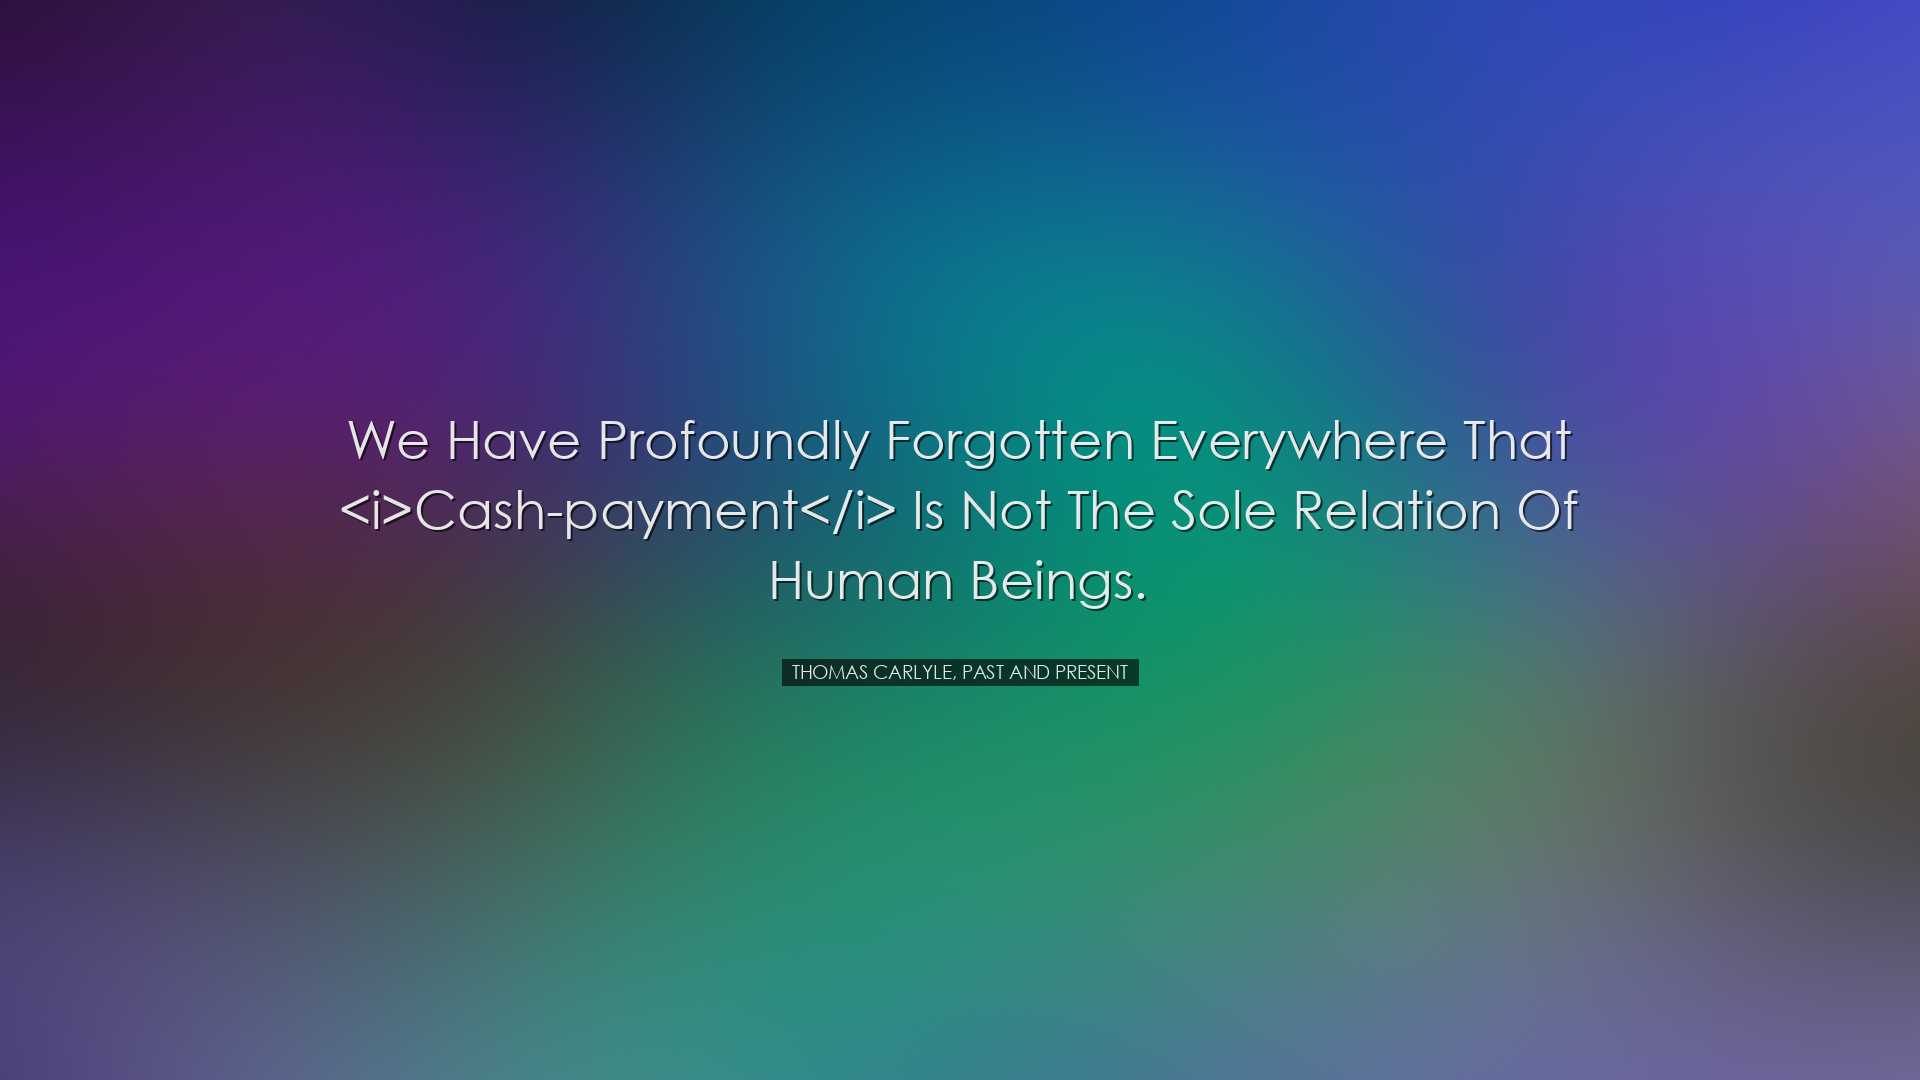 We have profoundly forgotten everywhere that Cash-payment i